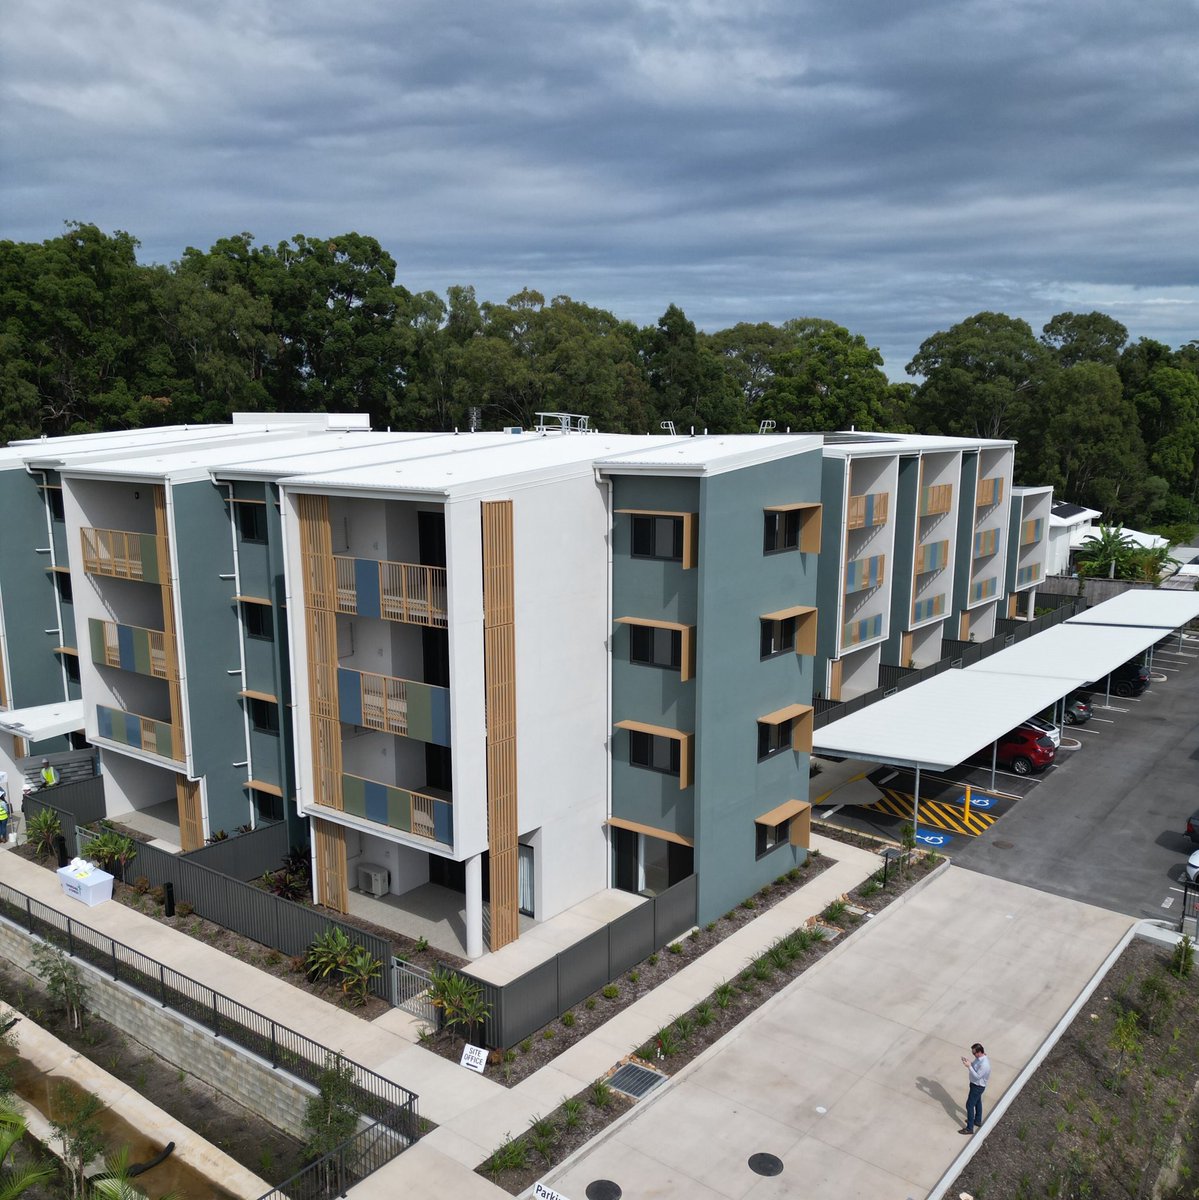 The Sunshine Coast just got more housing. We’re putting the finishing touches on 40 new social homes near Caloundra.